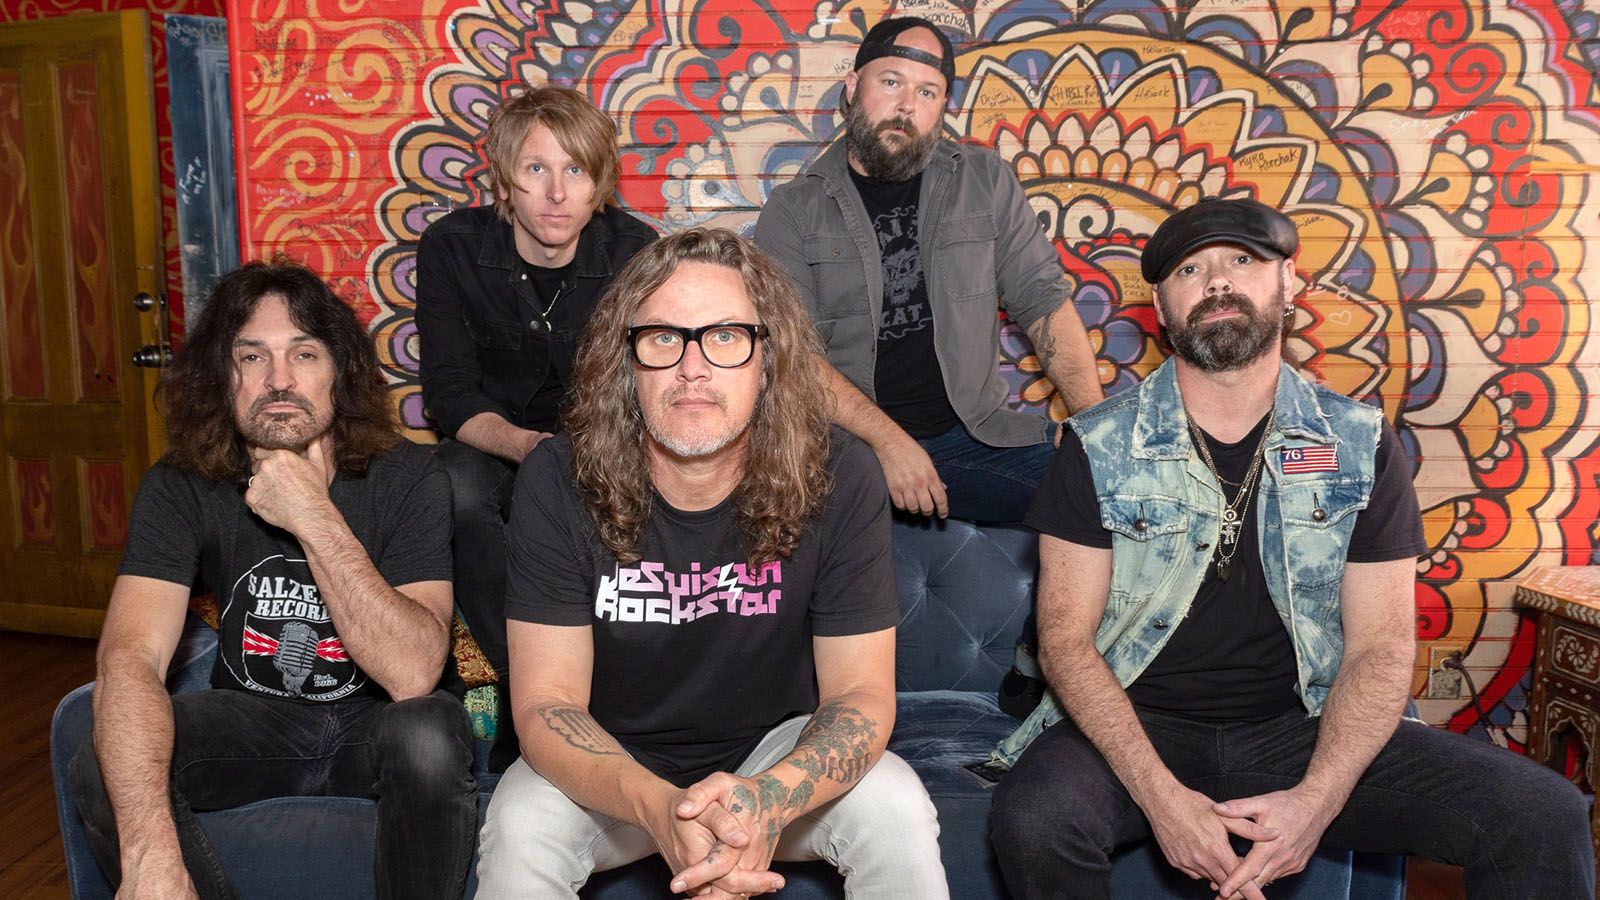 Candlebox will be at Sweetwater Performance Pavilion on June 18.